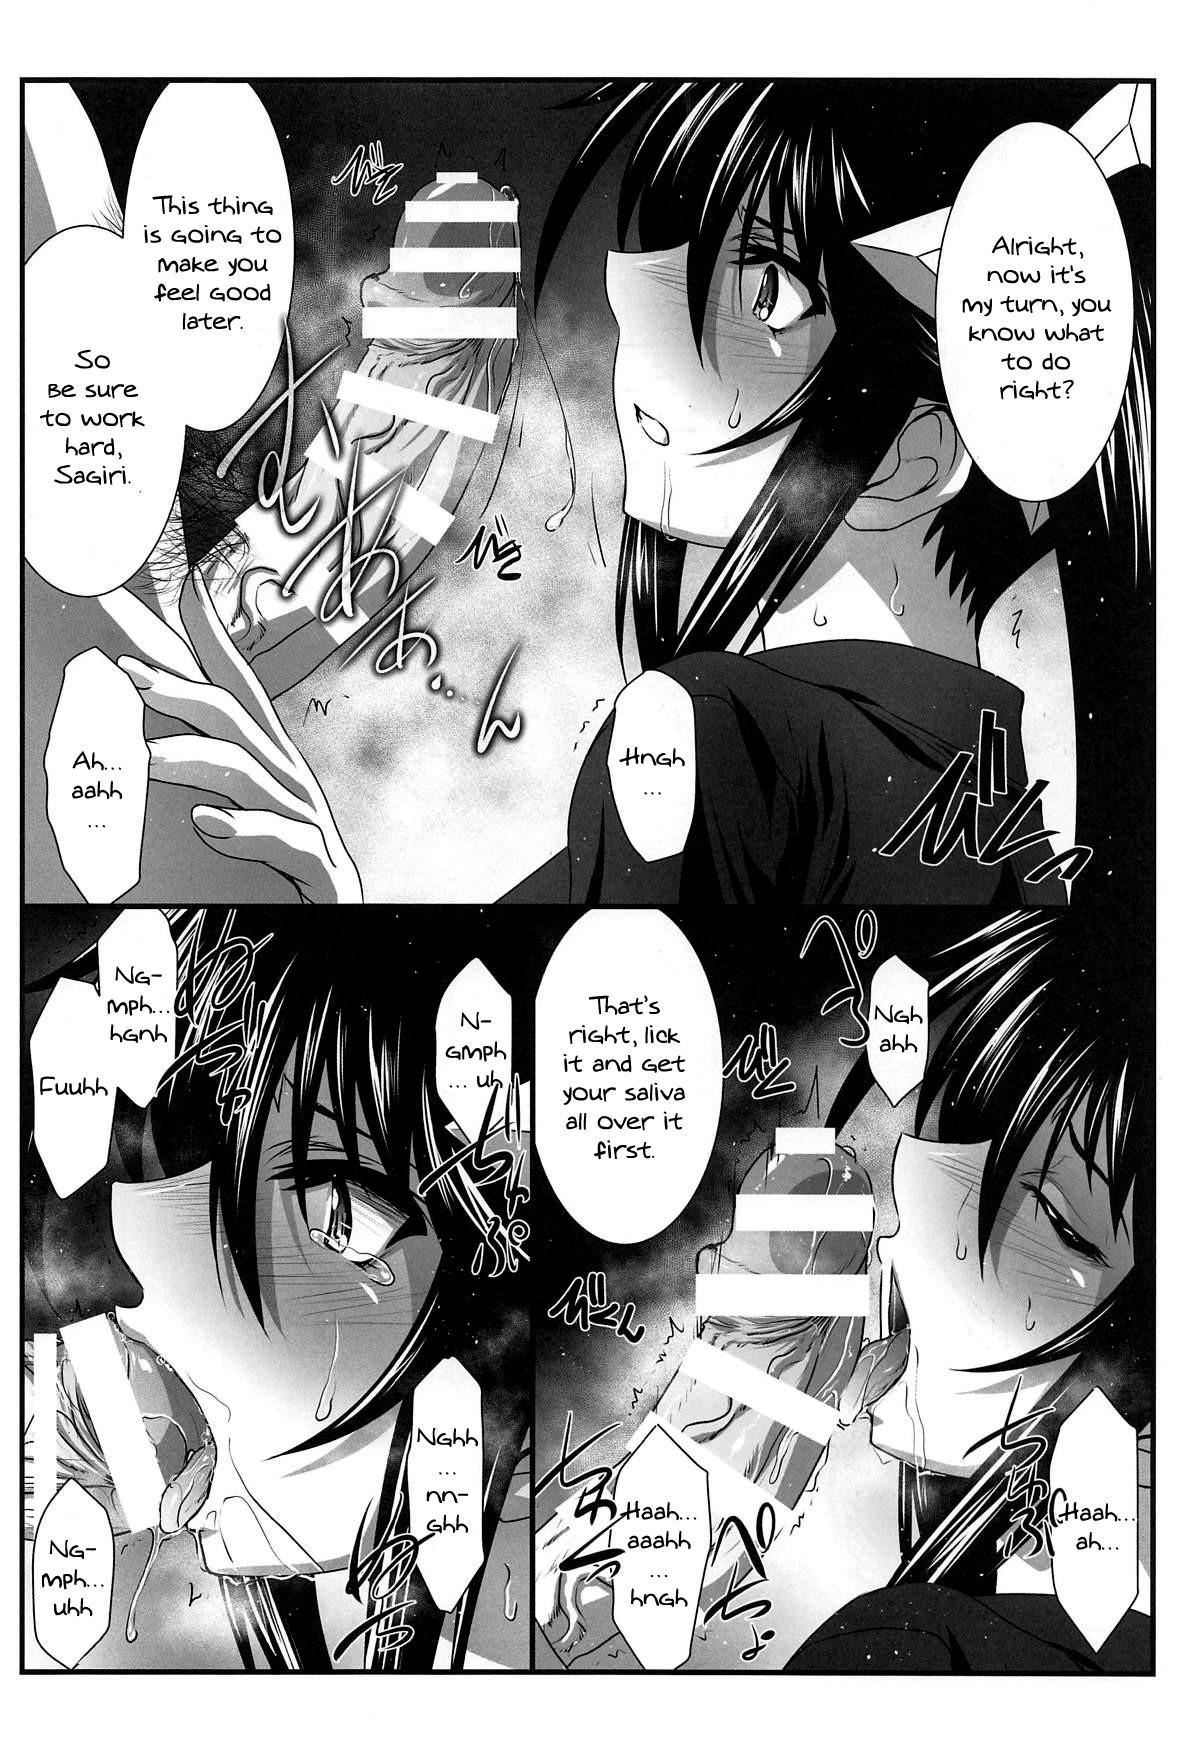 For Astral Bout Ver. 39 - Yuragisou no yuuna-san Assfingering - Page 7